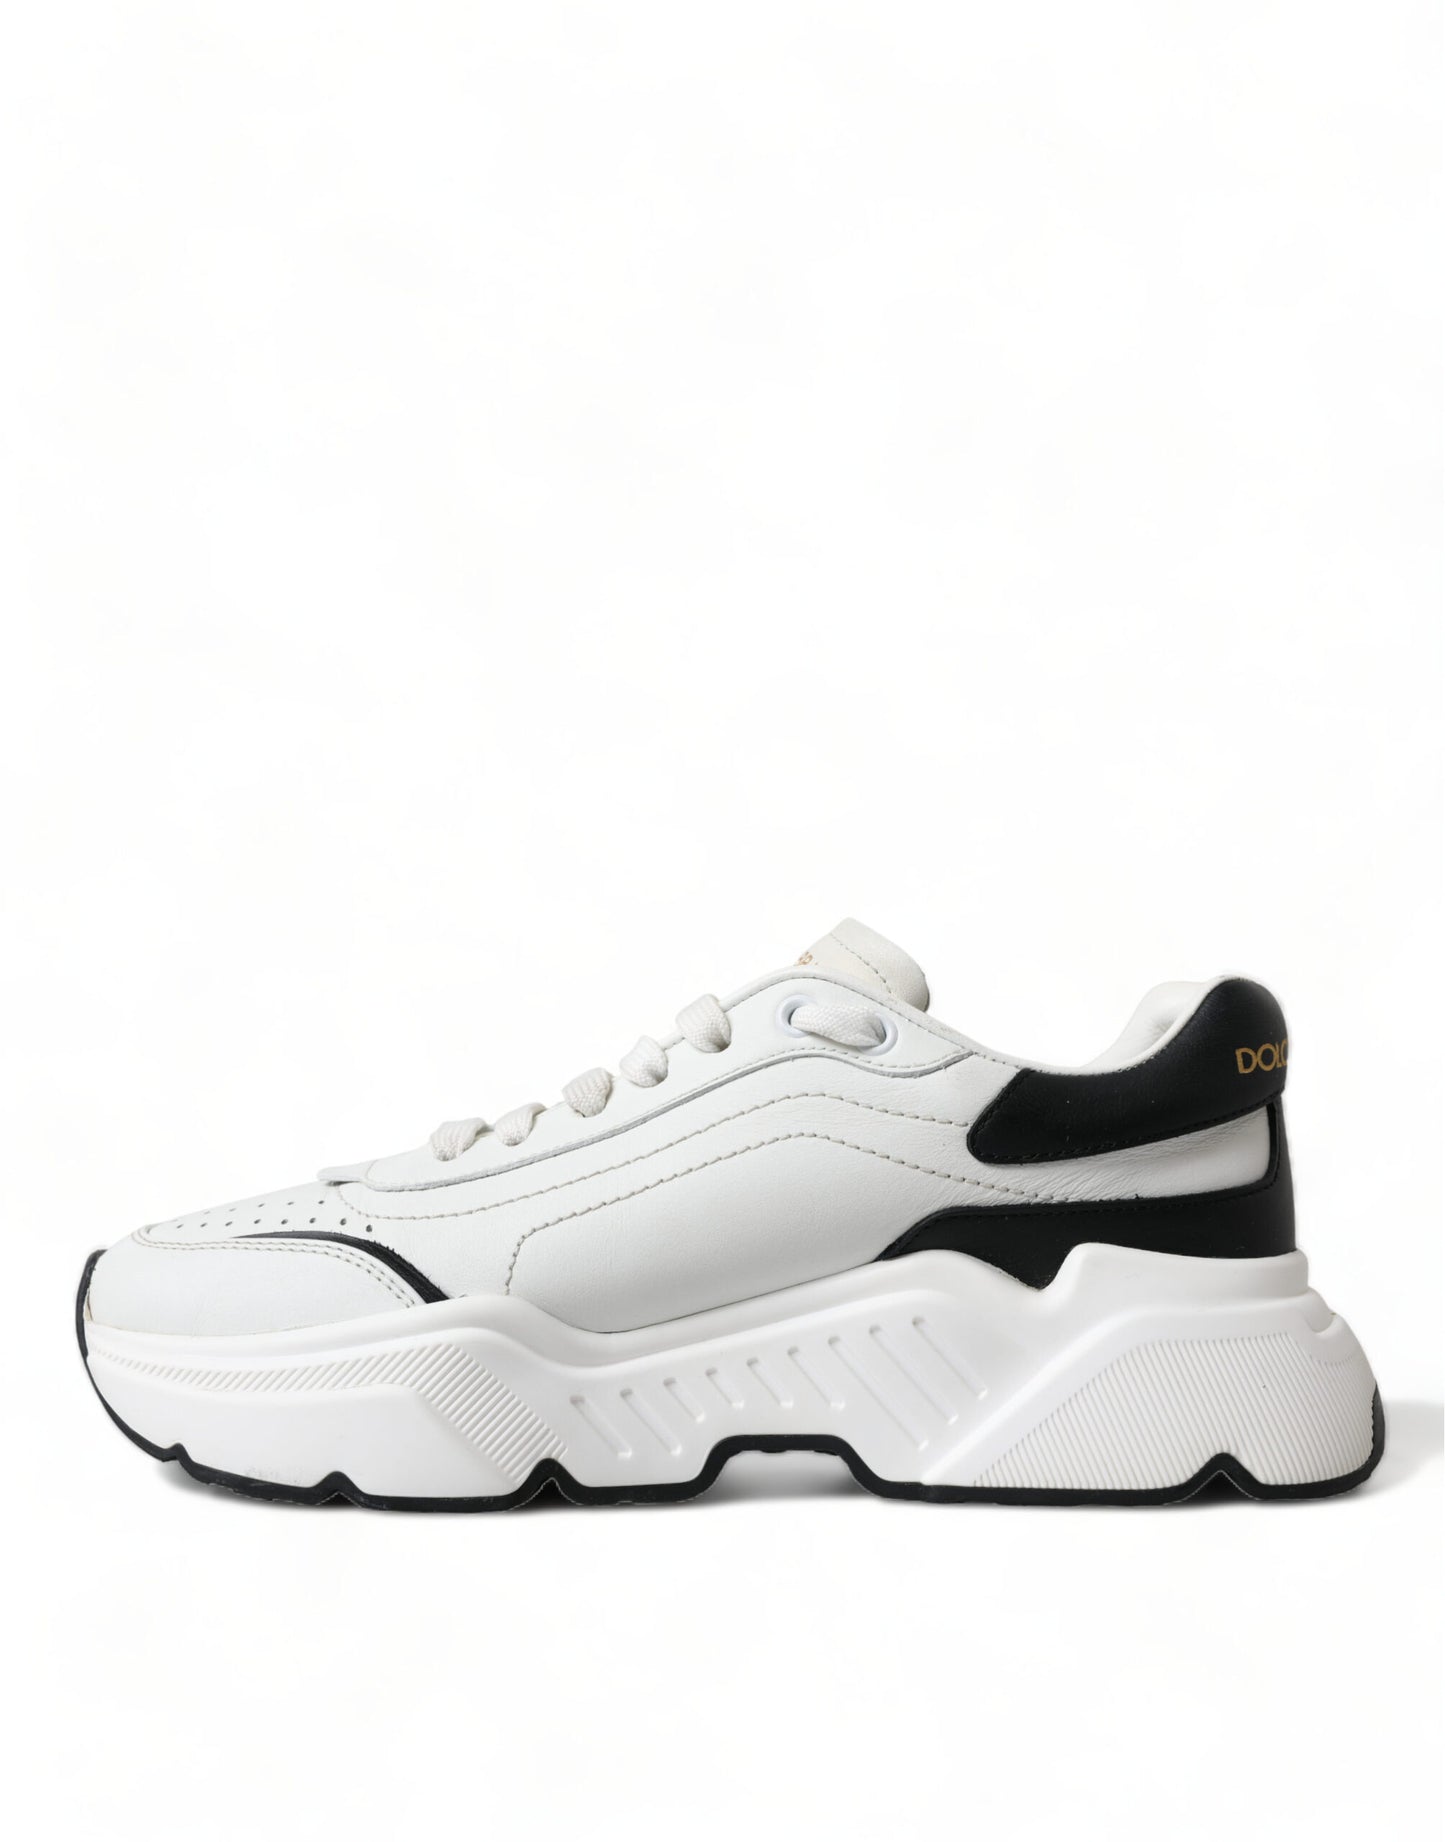 Dolce & Gabbana Chic Almond-Toe Daymaster Sneakers